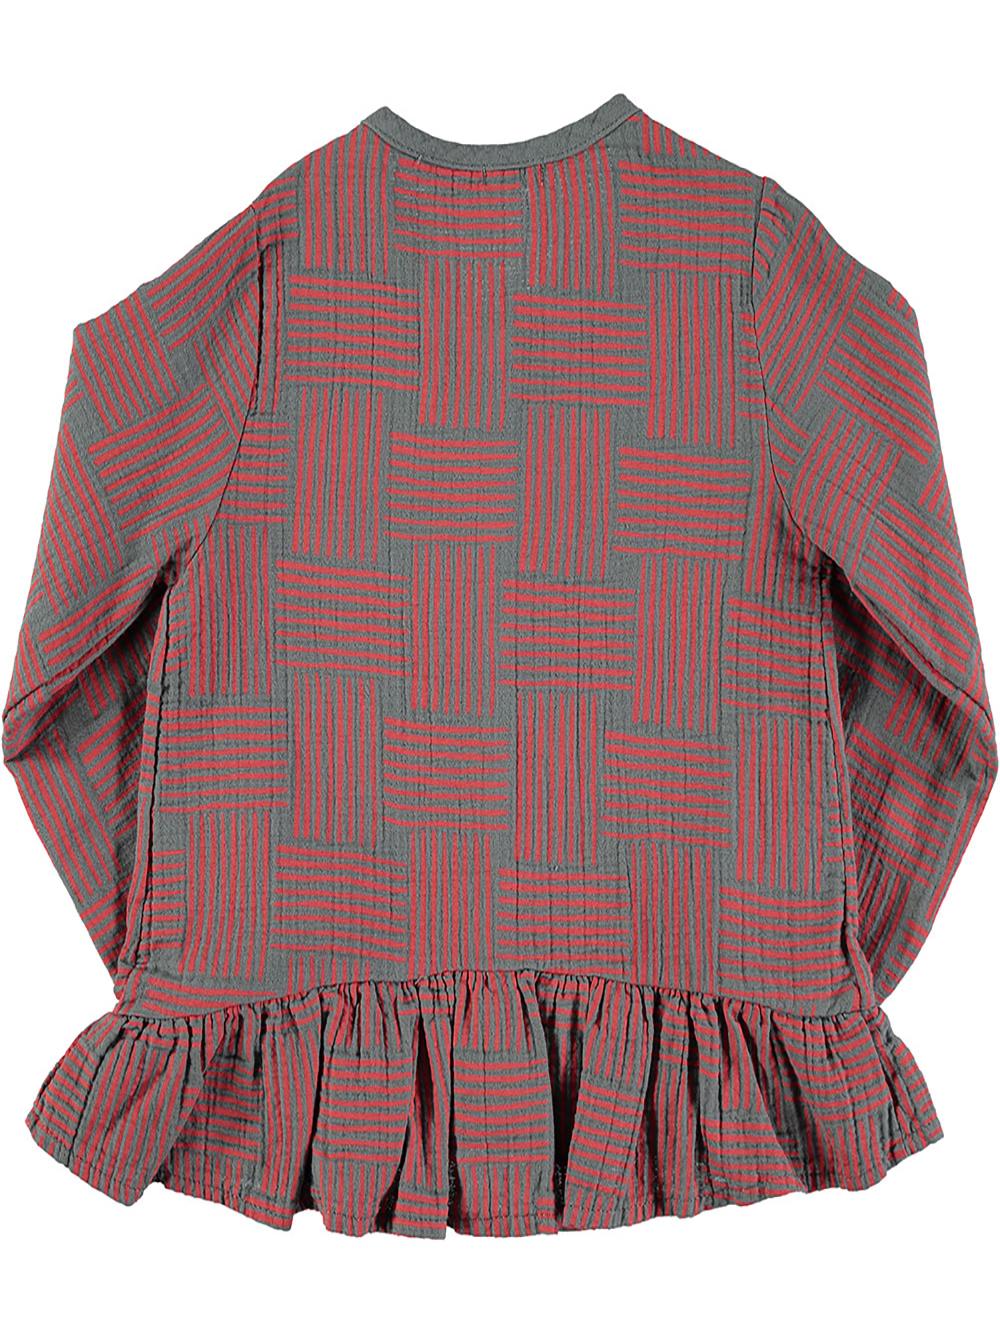 GRAY RUFFLED SHIRT WITH RED LINES PRINT